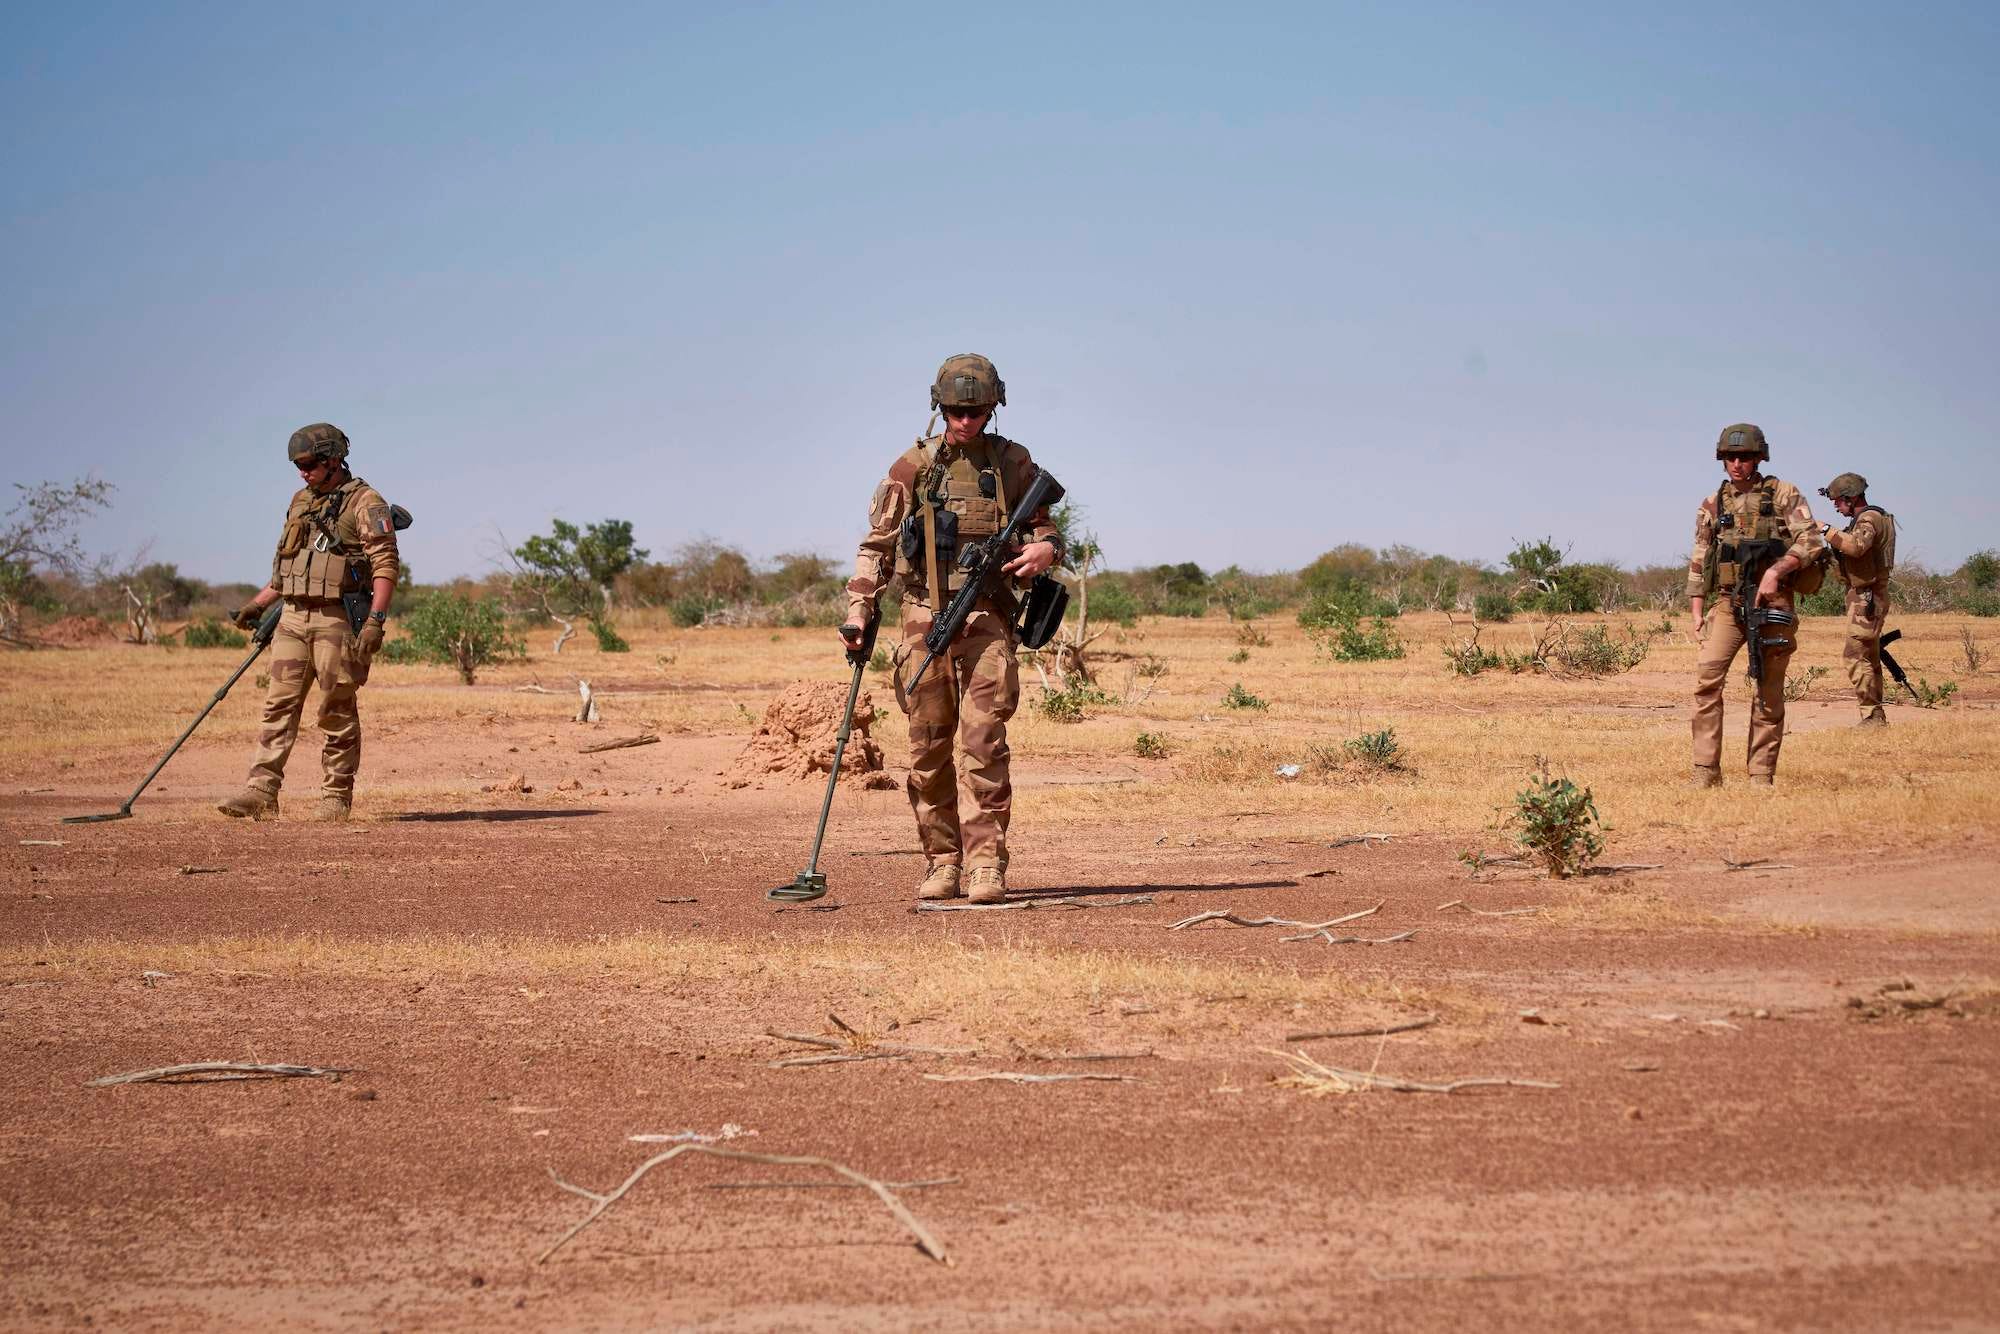 French soldiers with metal detectors in Burkina Faso